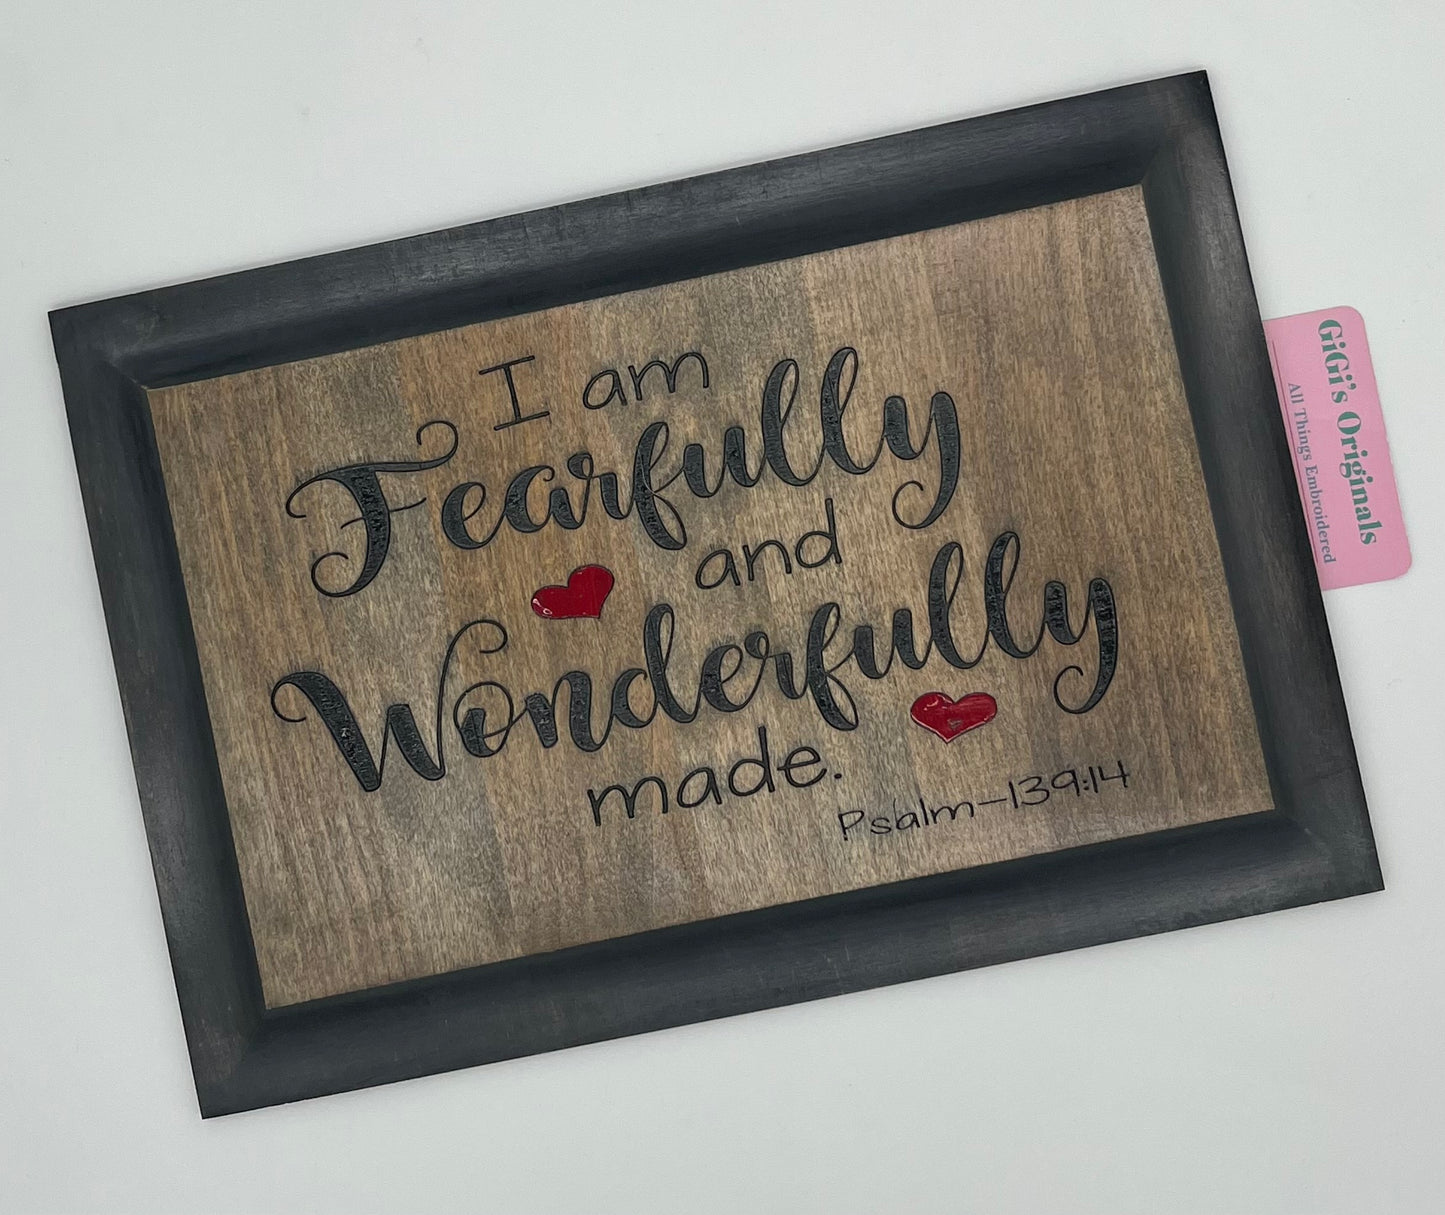 Fearfully and Wonderfully made